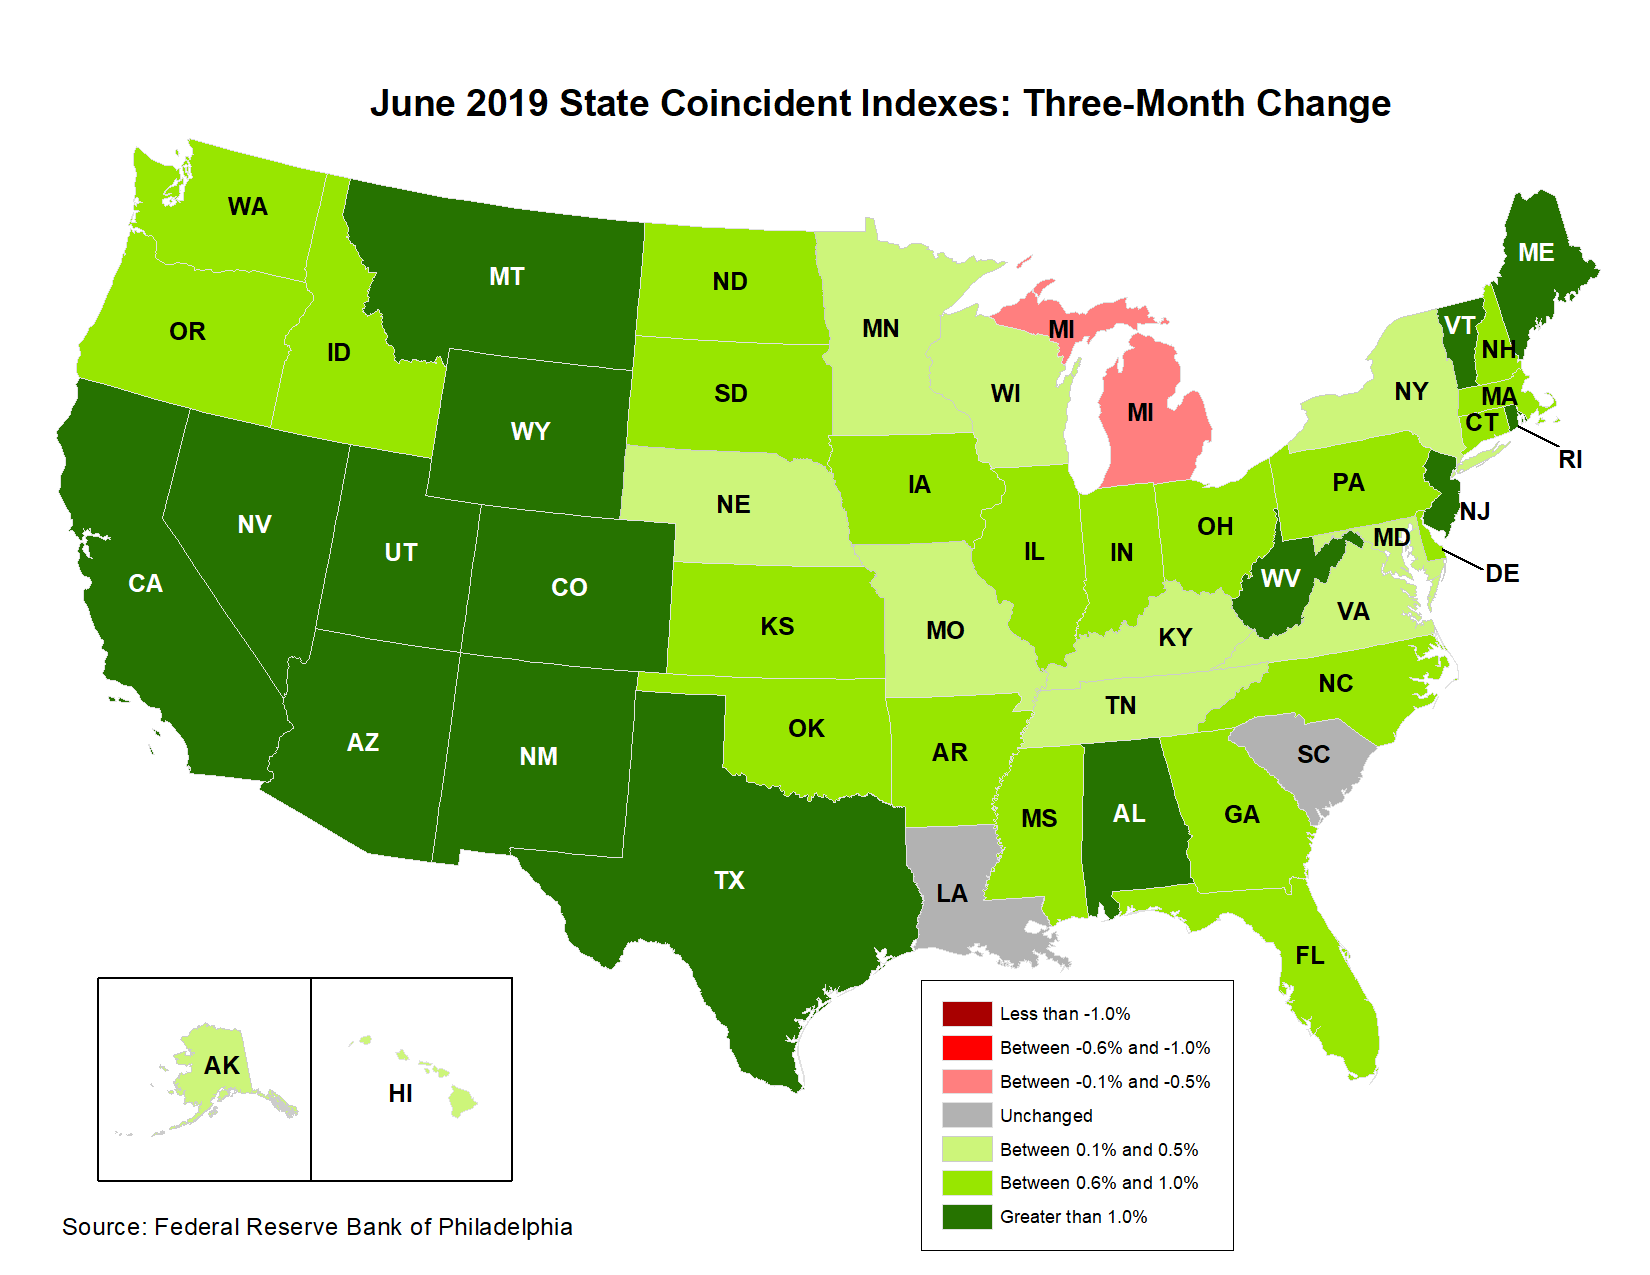 Map of the U.S. showing the State Coincident Indexes Three-Month Change in June 2019